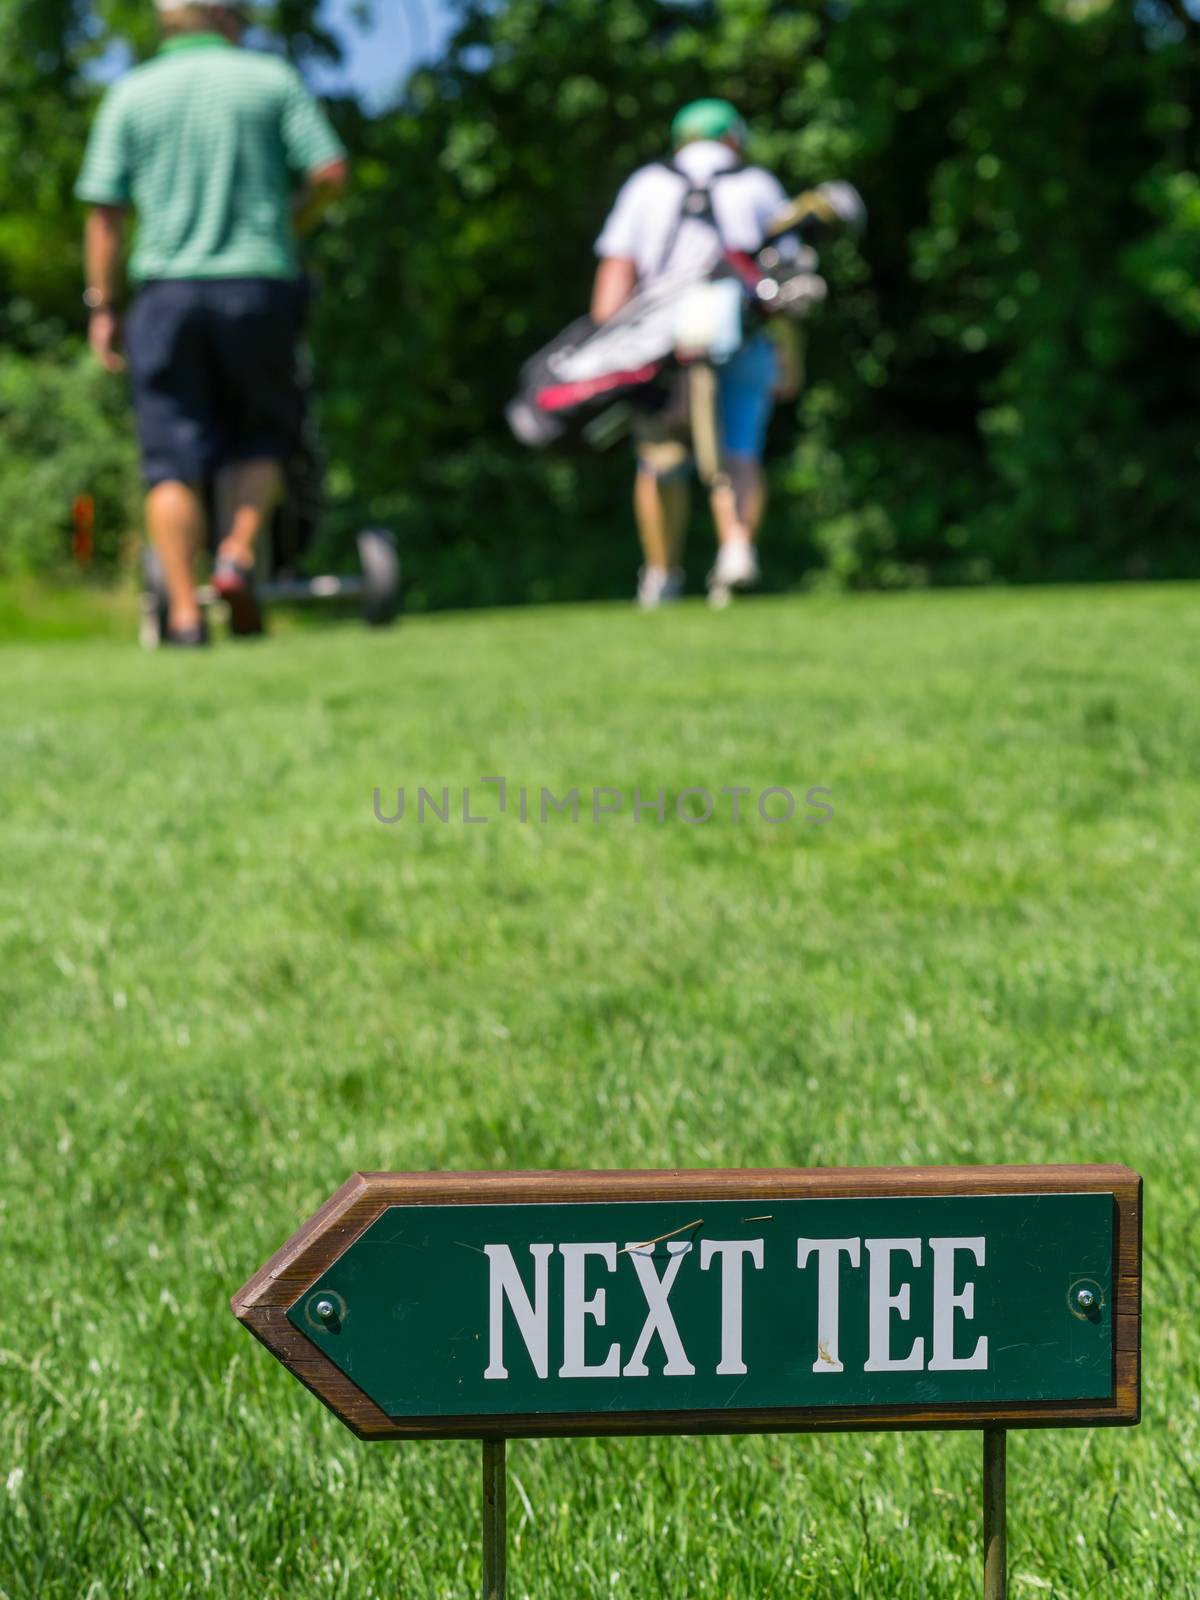 Next tee sign at the golf course by sumners